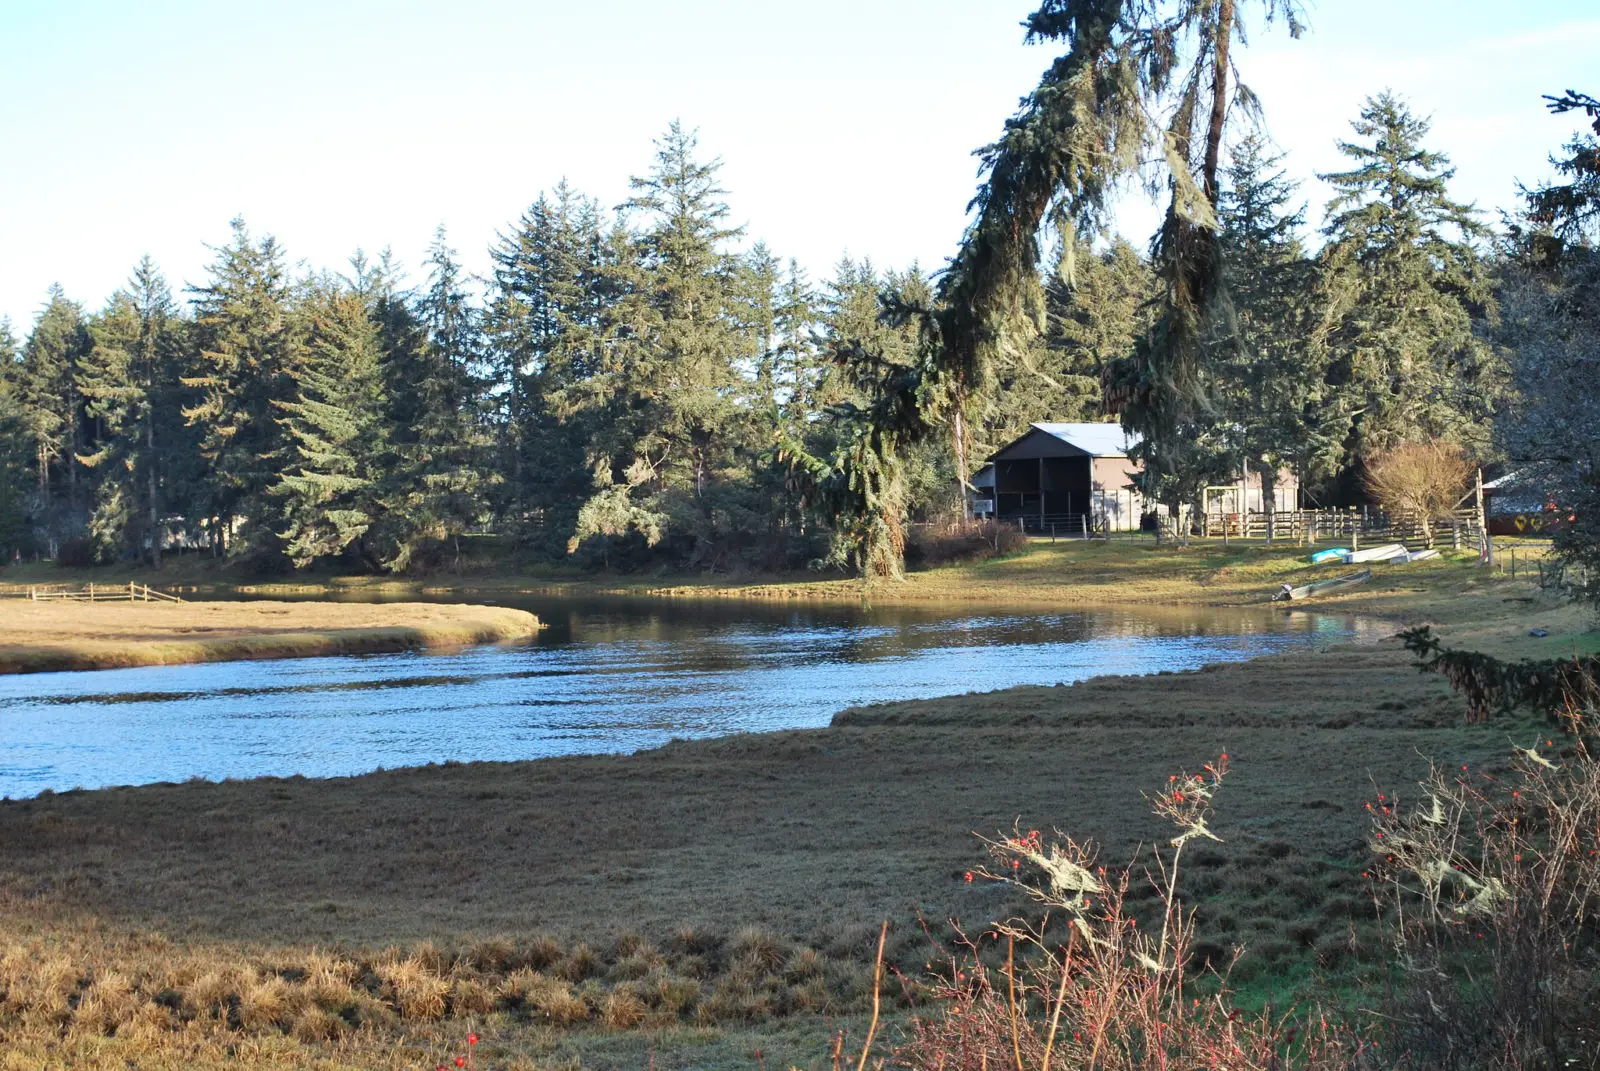 The Tlell River during low tide - Photo: George Dean (CC)